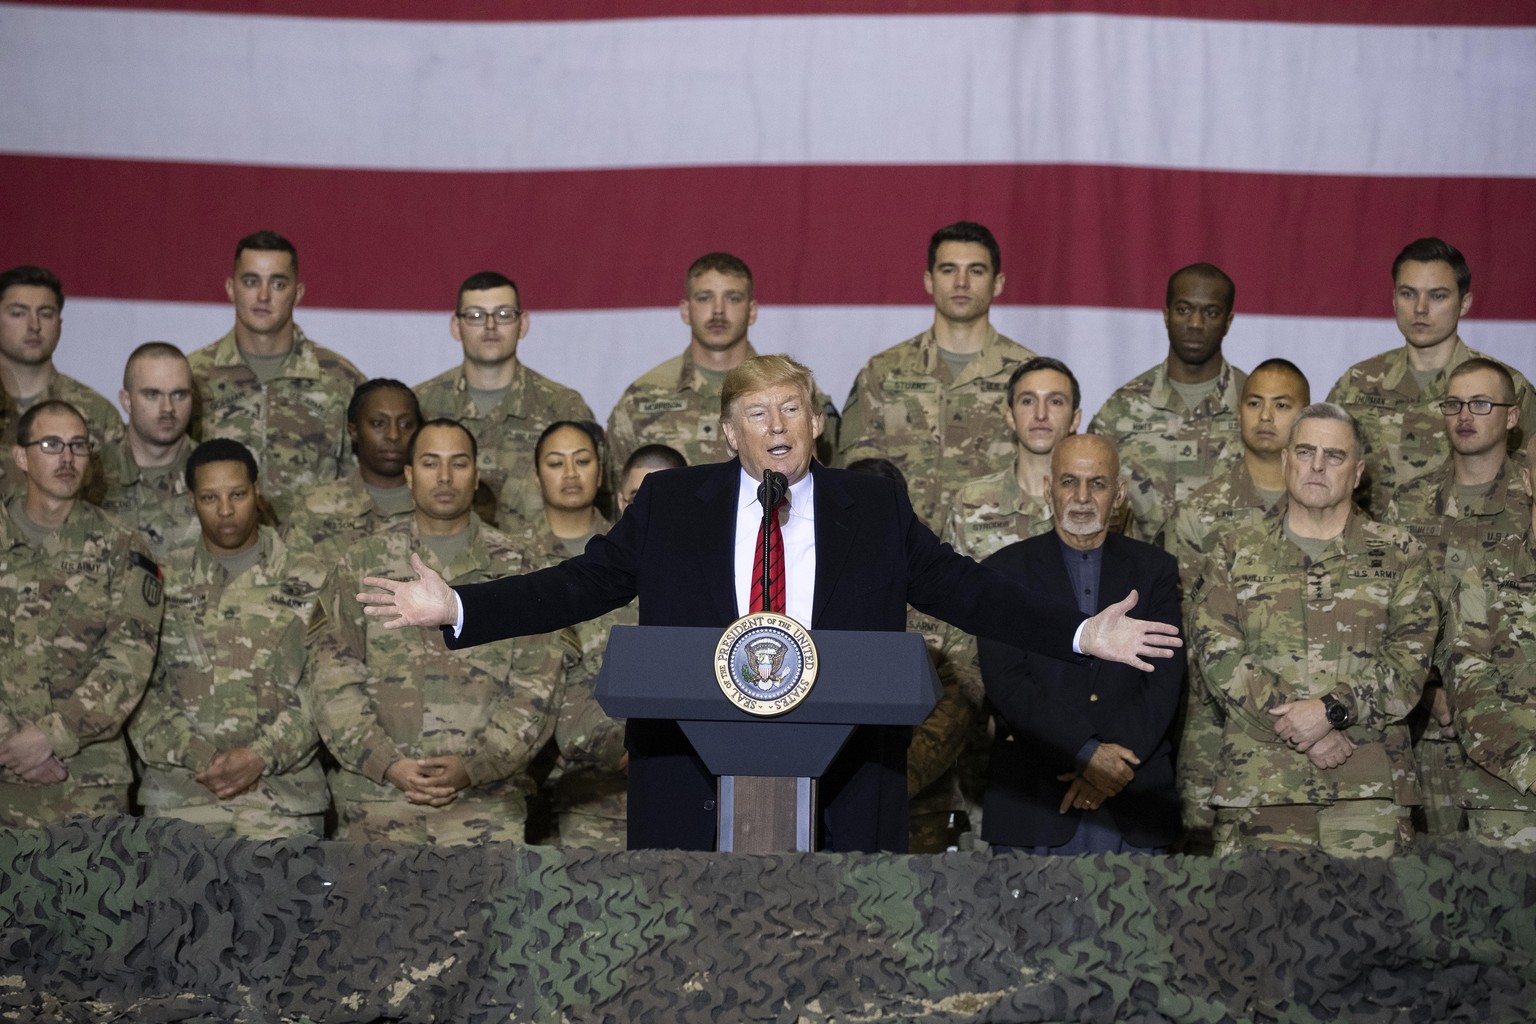 FILE - In this Nov. 28, 2019 file photo, President Donald Trump, center, with Afghan President Ashraf Ghani and Joint Chiefs Chairman Gen. Mark Milley, behind him at right, addresses members of the mi ...